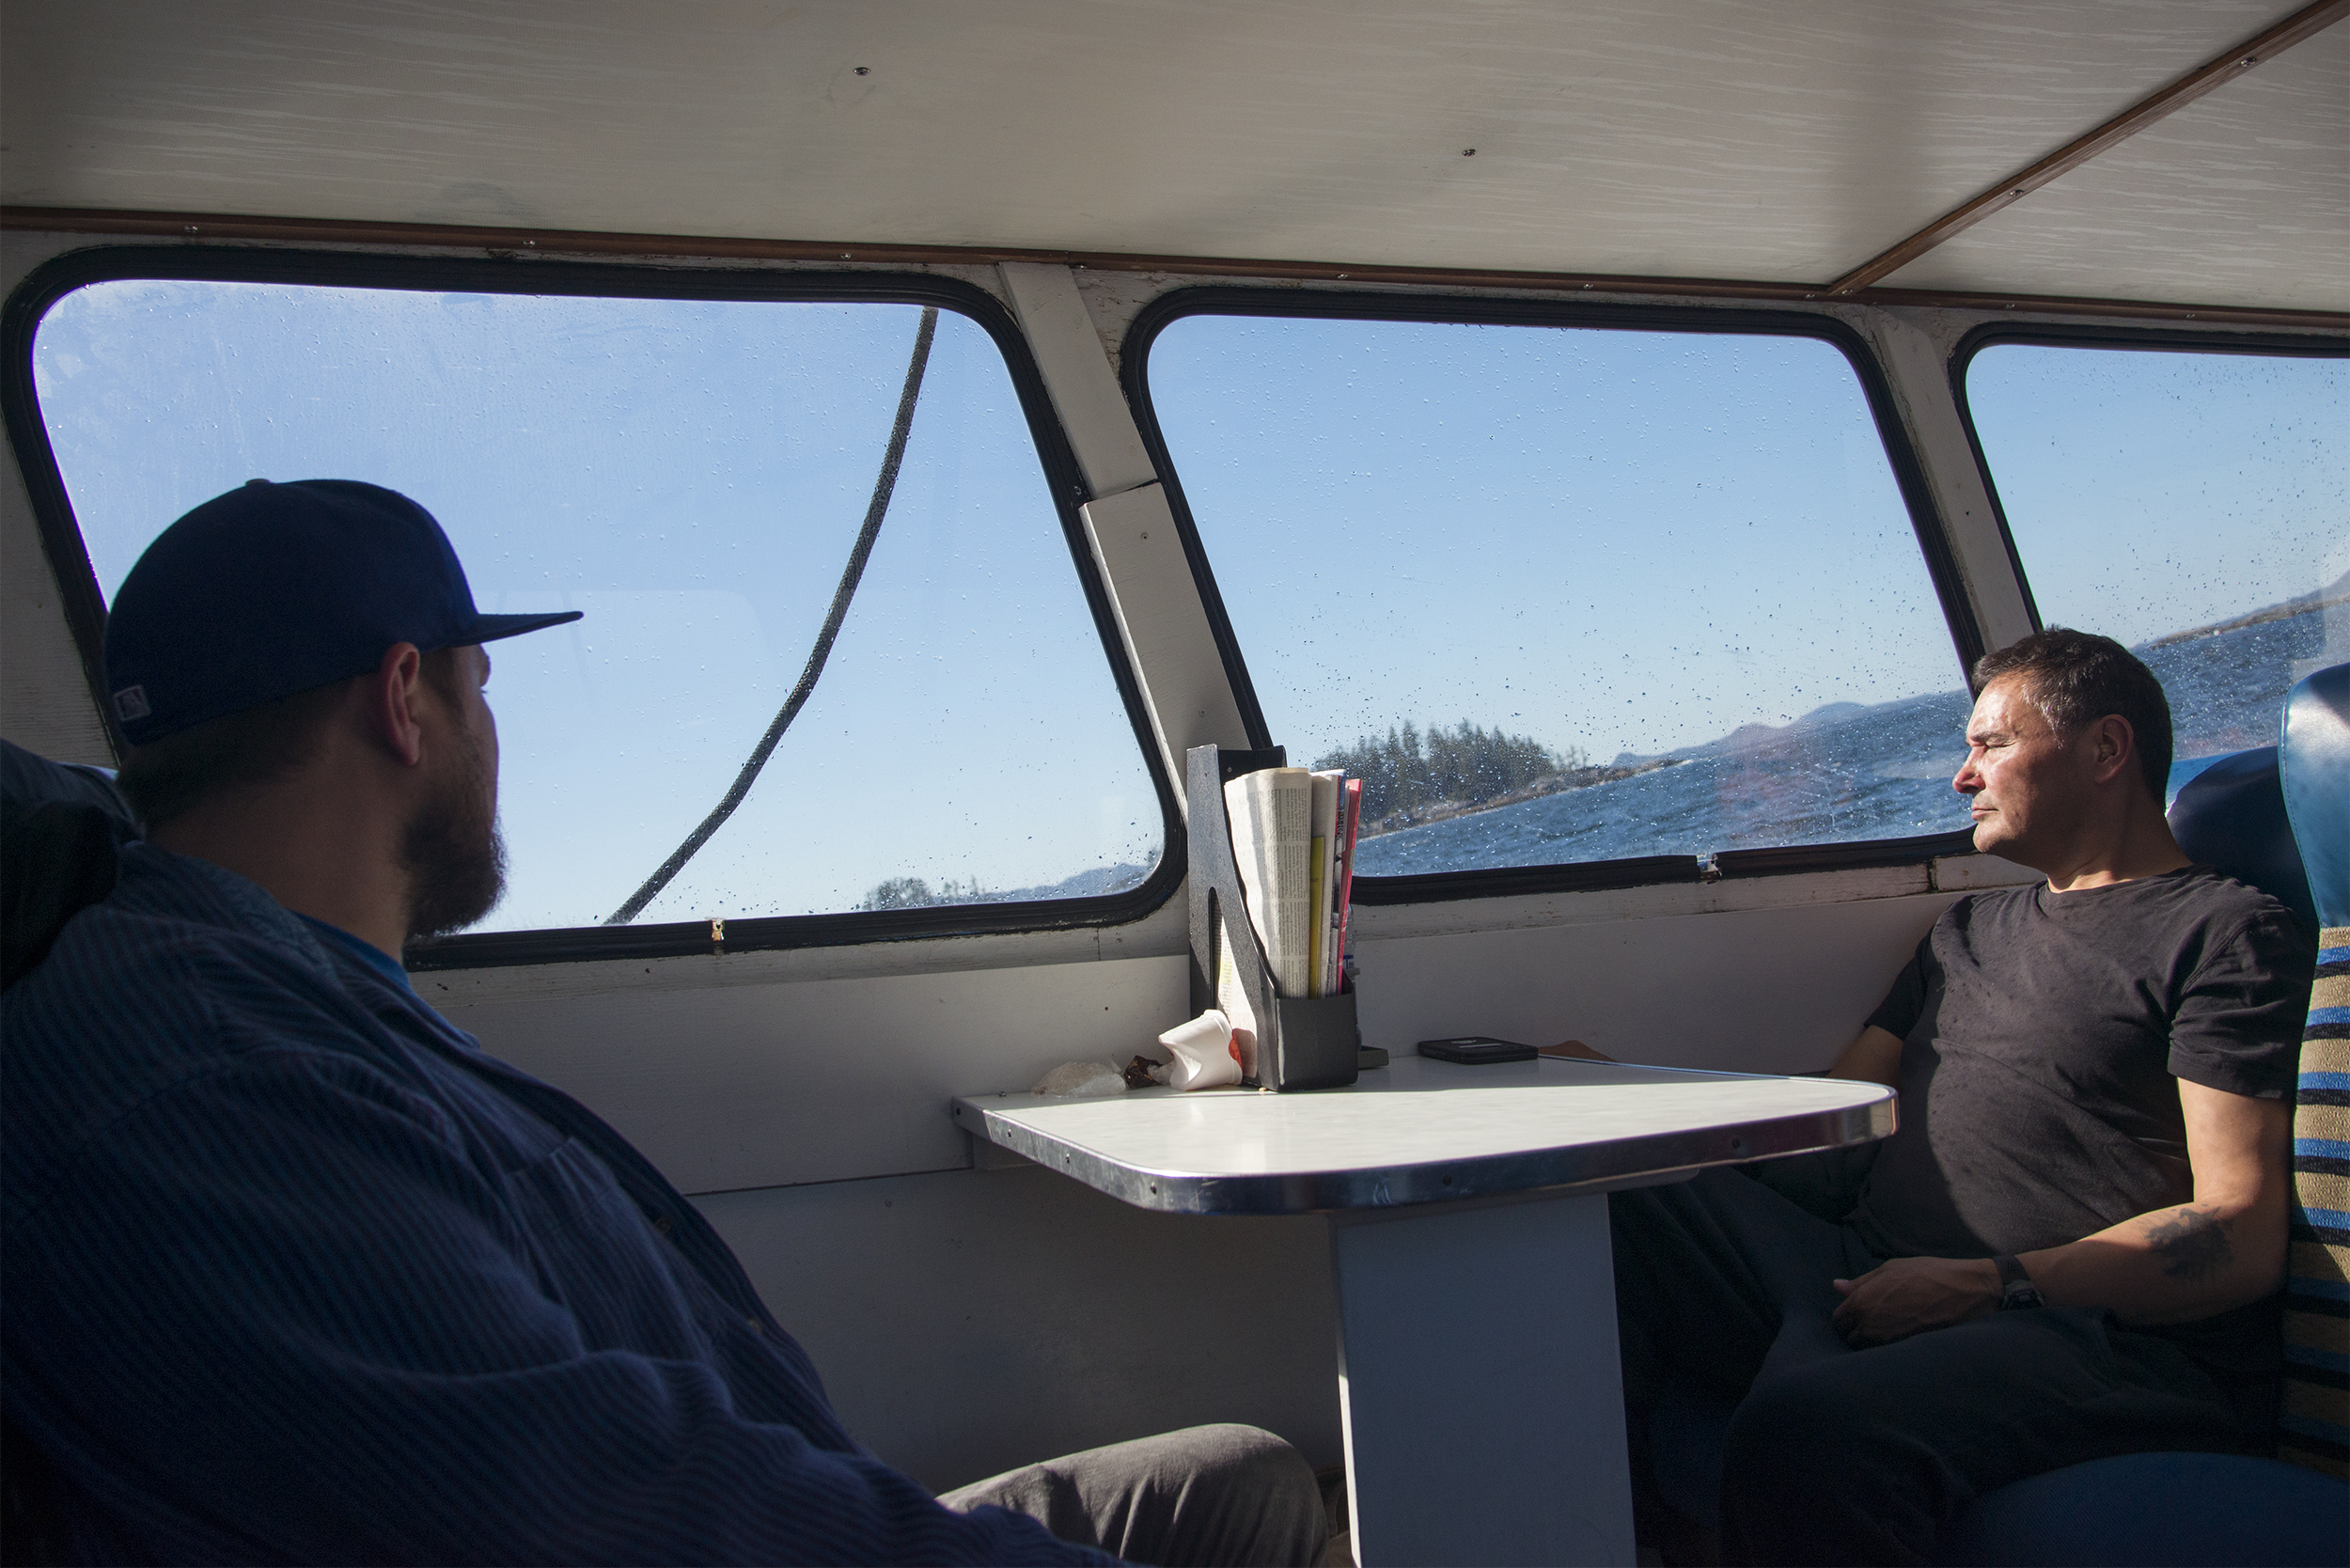 With the boat rocking and the horizon pitching, William Beynon of the Metlakatla Stewardship Society concentrates on the central coast scenery. Photo by Shanna Baker